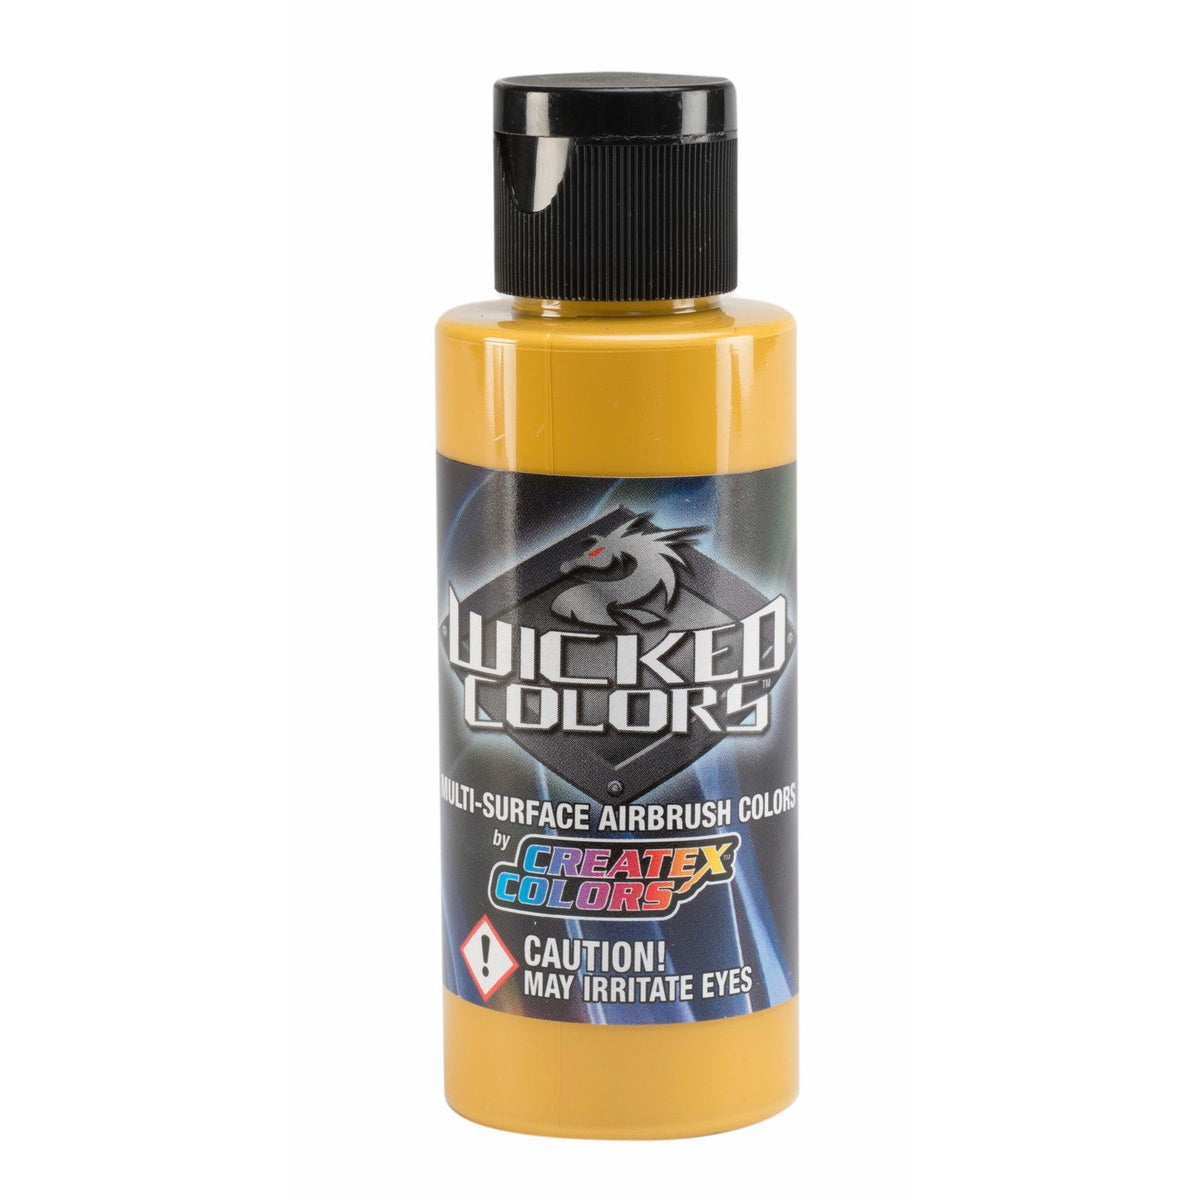 Wicked Multi-Surface Airbrush Colors - W067 Detail Raw Sienna 2 oz - merriartist.com